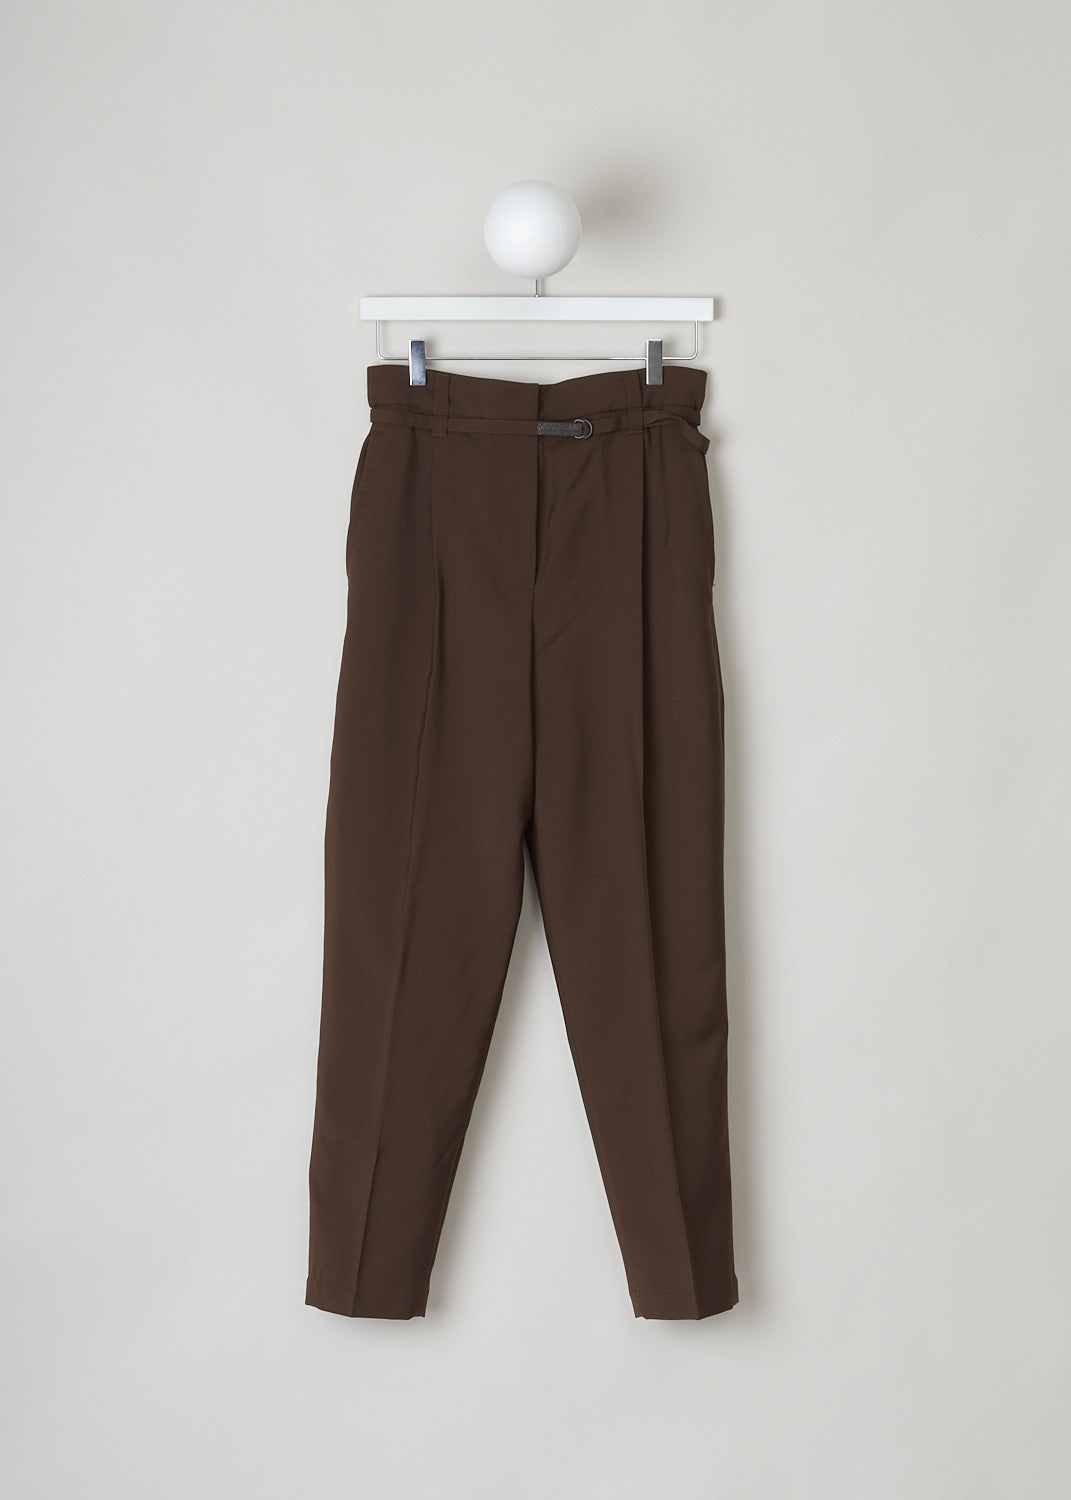 BRUNELLO CUCINELLI, BROWN PAPERBAG PANTS, MA185P7461_C8517, Brown, Front, These brown pants have a paperbag waist which is half elasticated. These pants come with both a broad and a narrow belt loop. A narrow fabric belt with monili beading is included. A concealed snap button and zipper function as the closure option. These pants have tapered pant legs with centre creases. Slanted pockets can be found in the front and welt pockets in the back.
